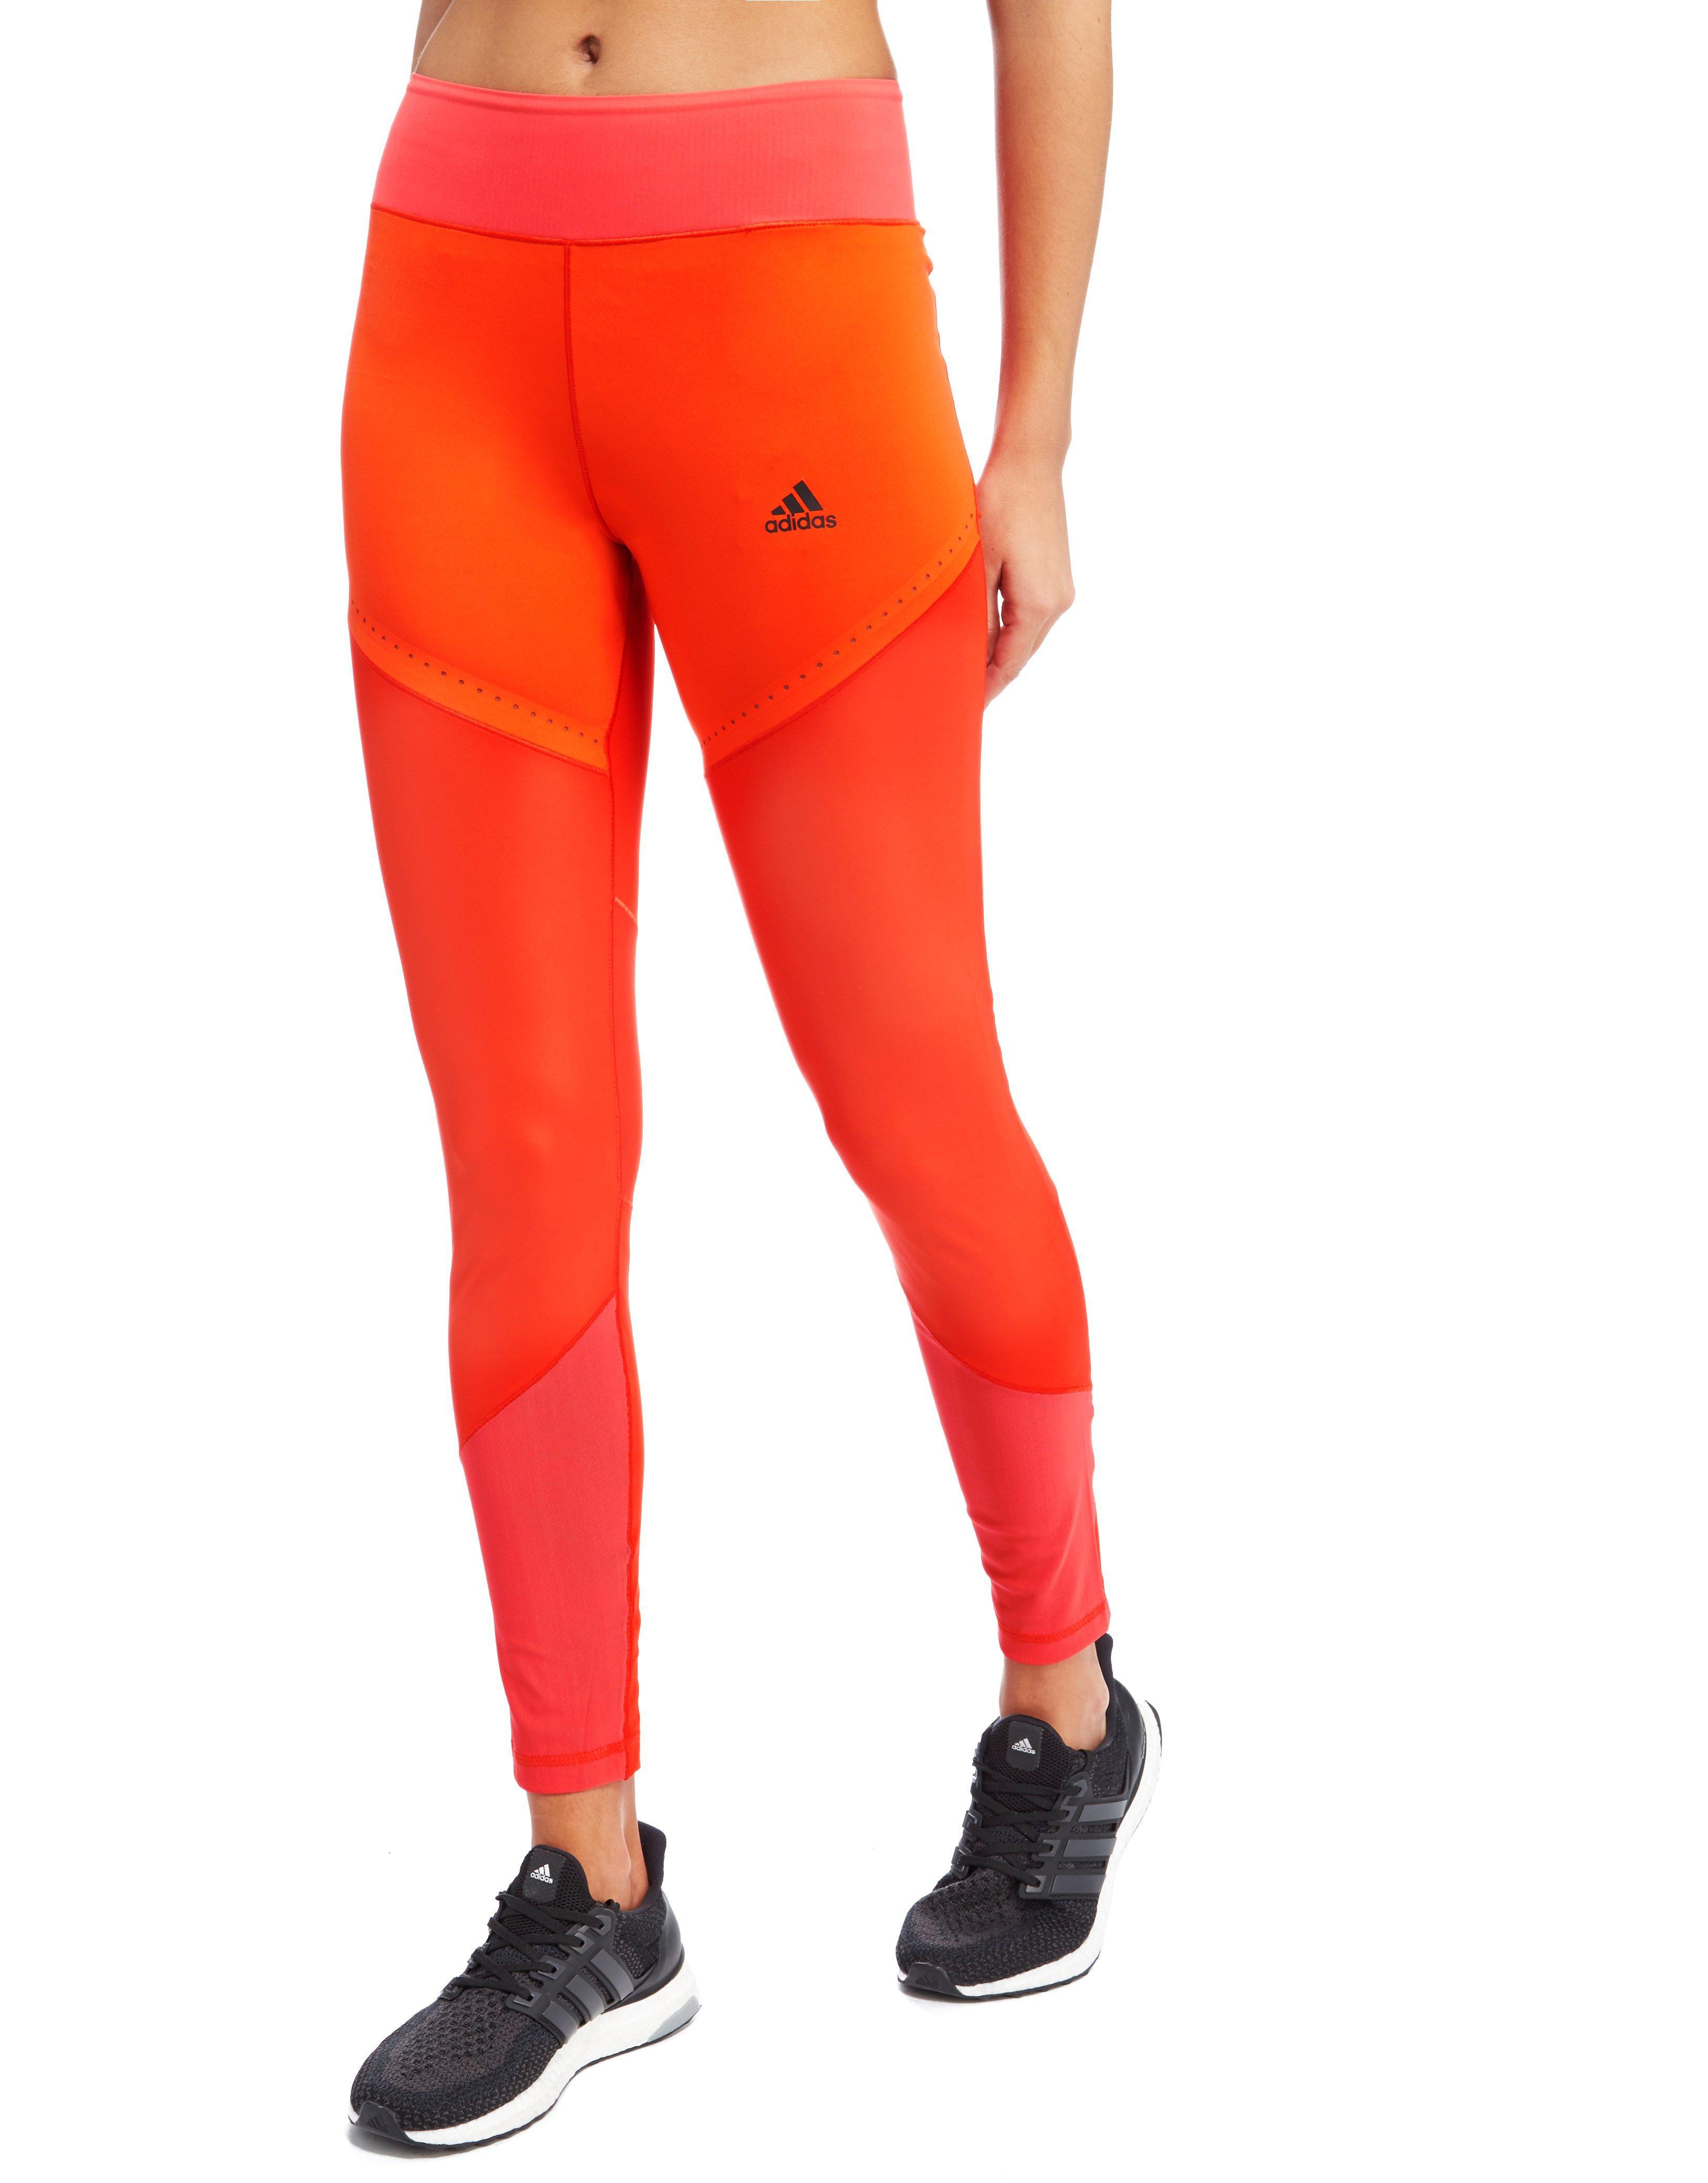 adidas Synthetic Ultimate Tights in Red/Pink/Orange (Red) - Lyst